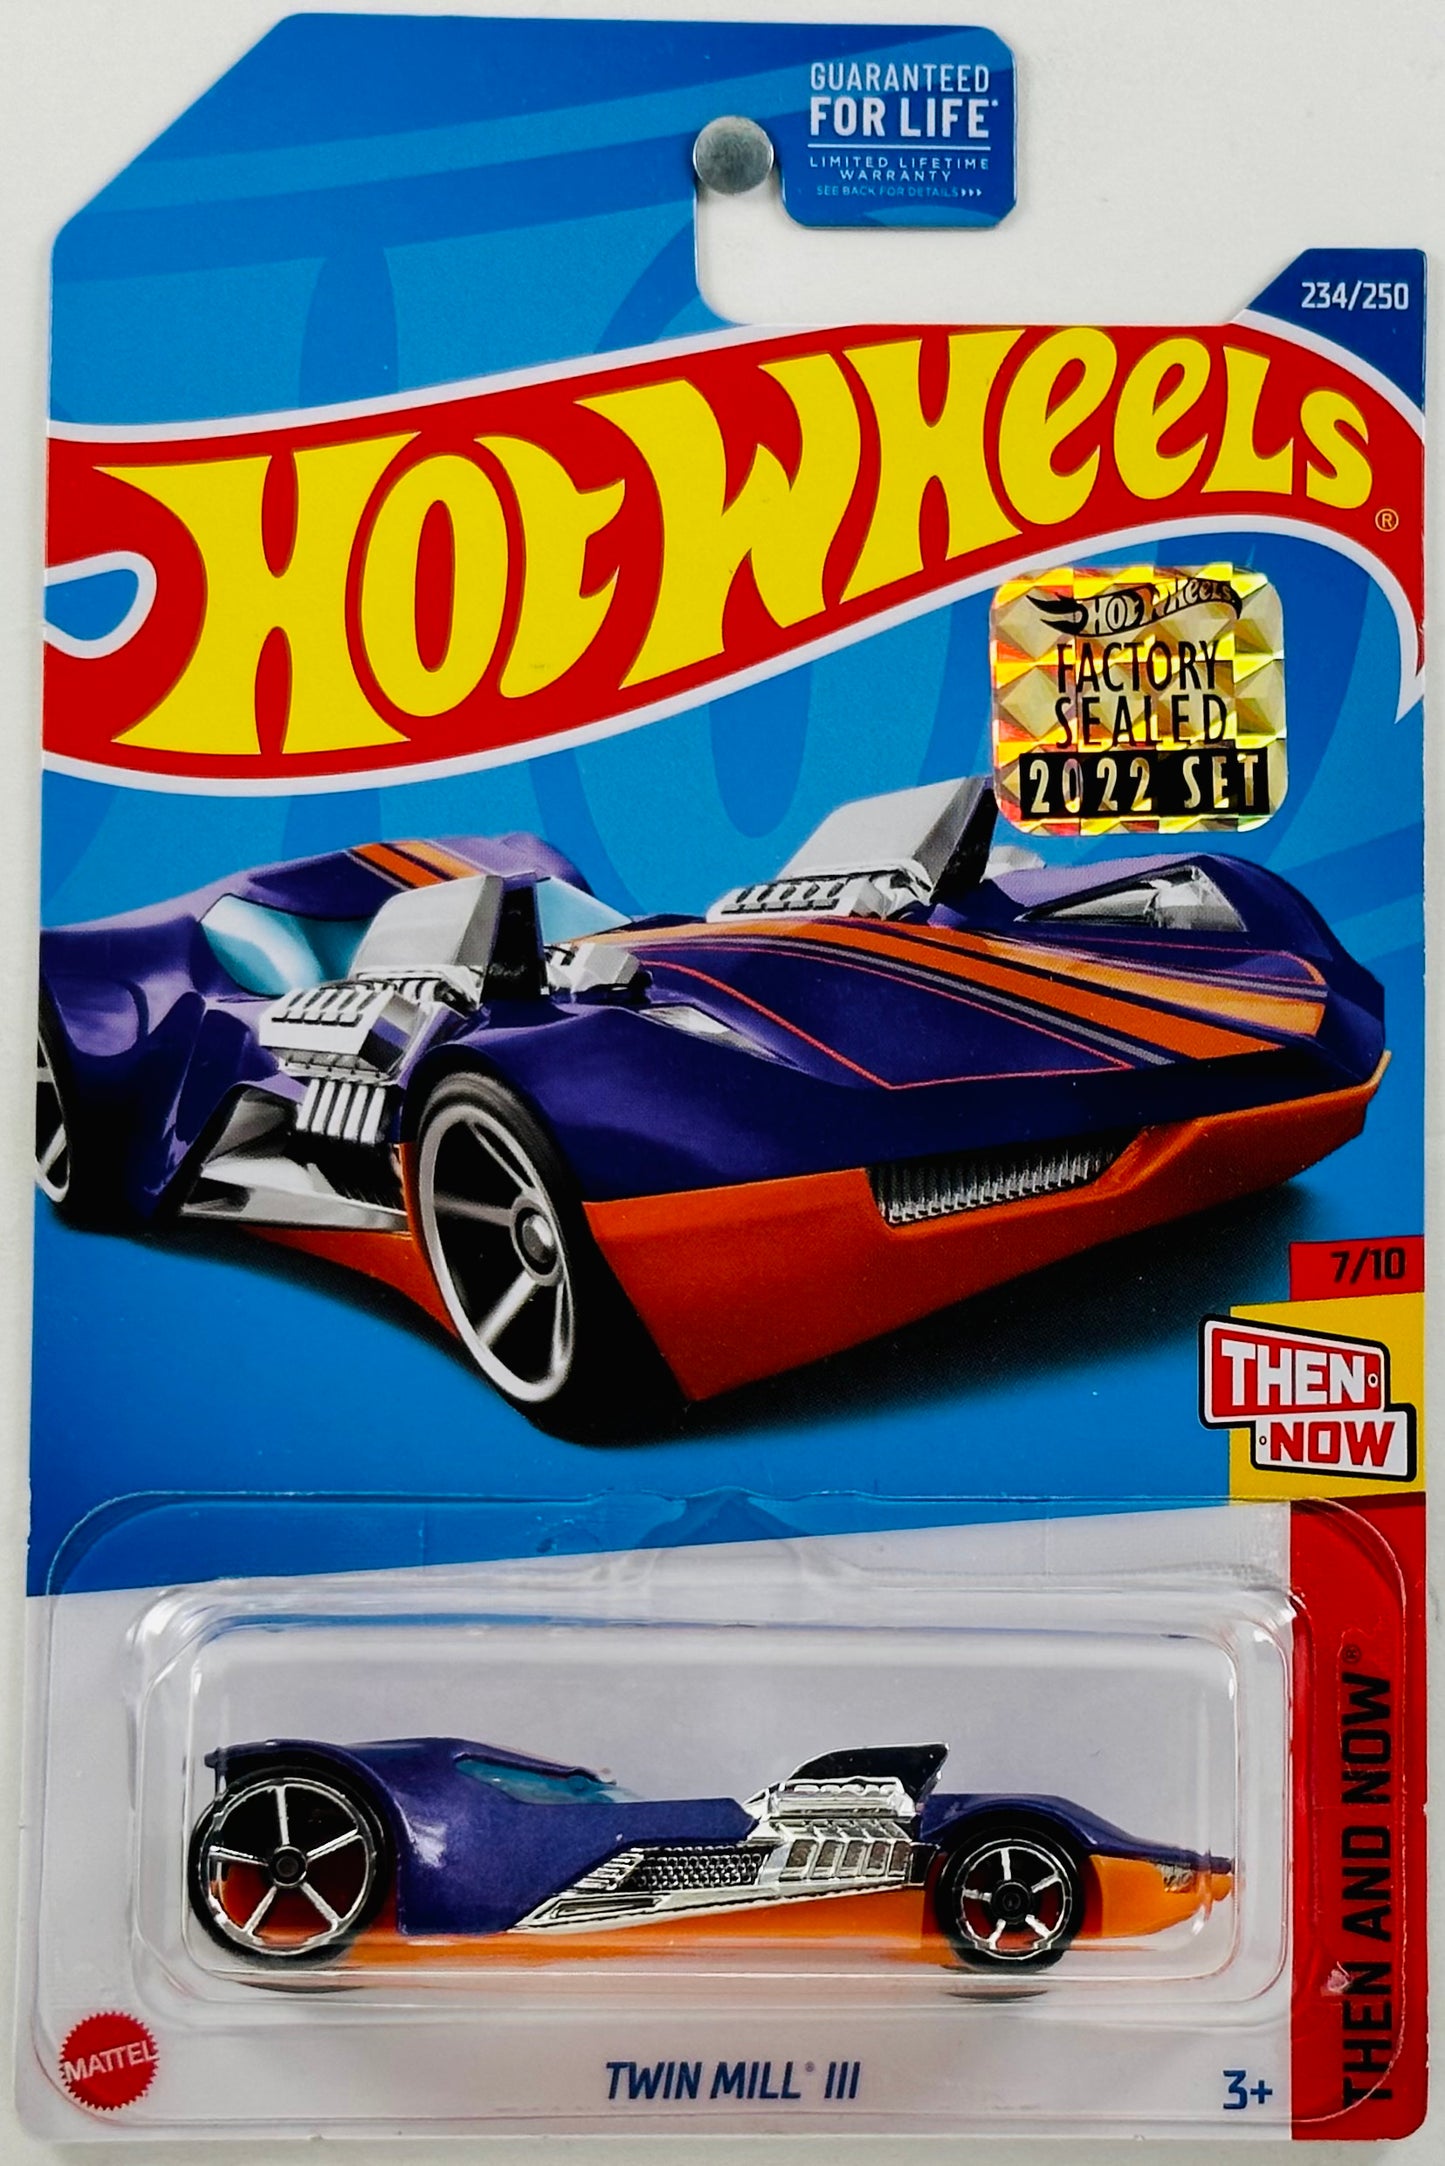 Hot Wheels 2022 - Collector # 234/250 - Then And Now 7/10 - Twin Mill III - Purple - FSC